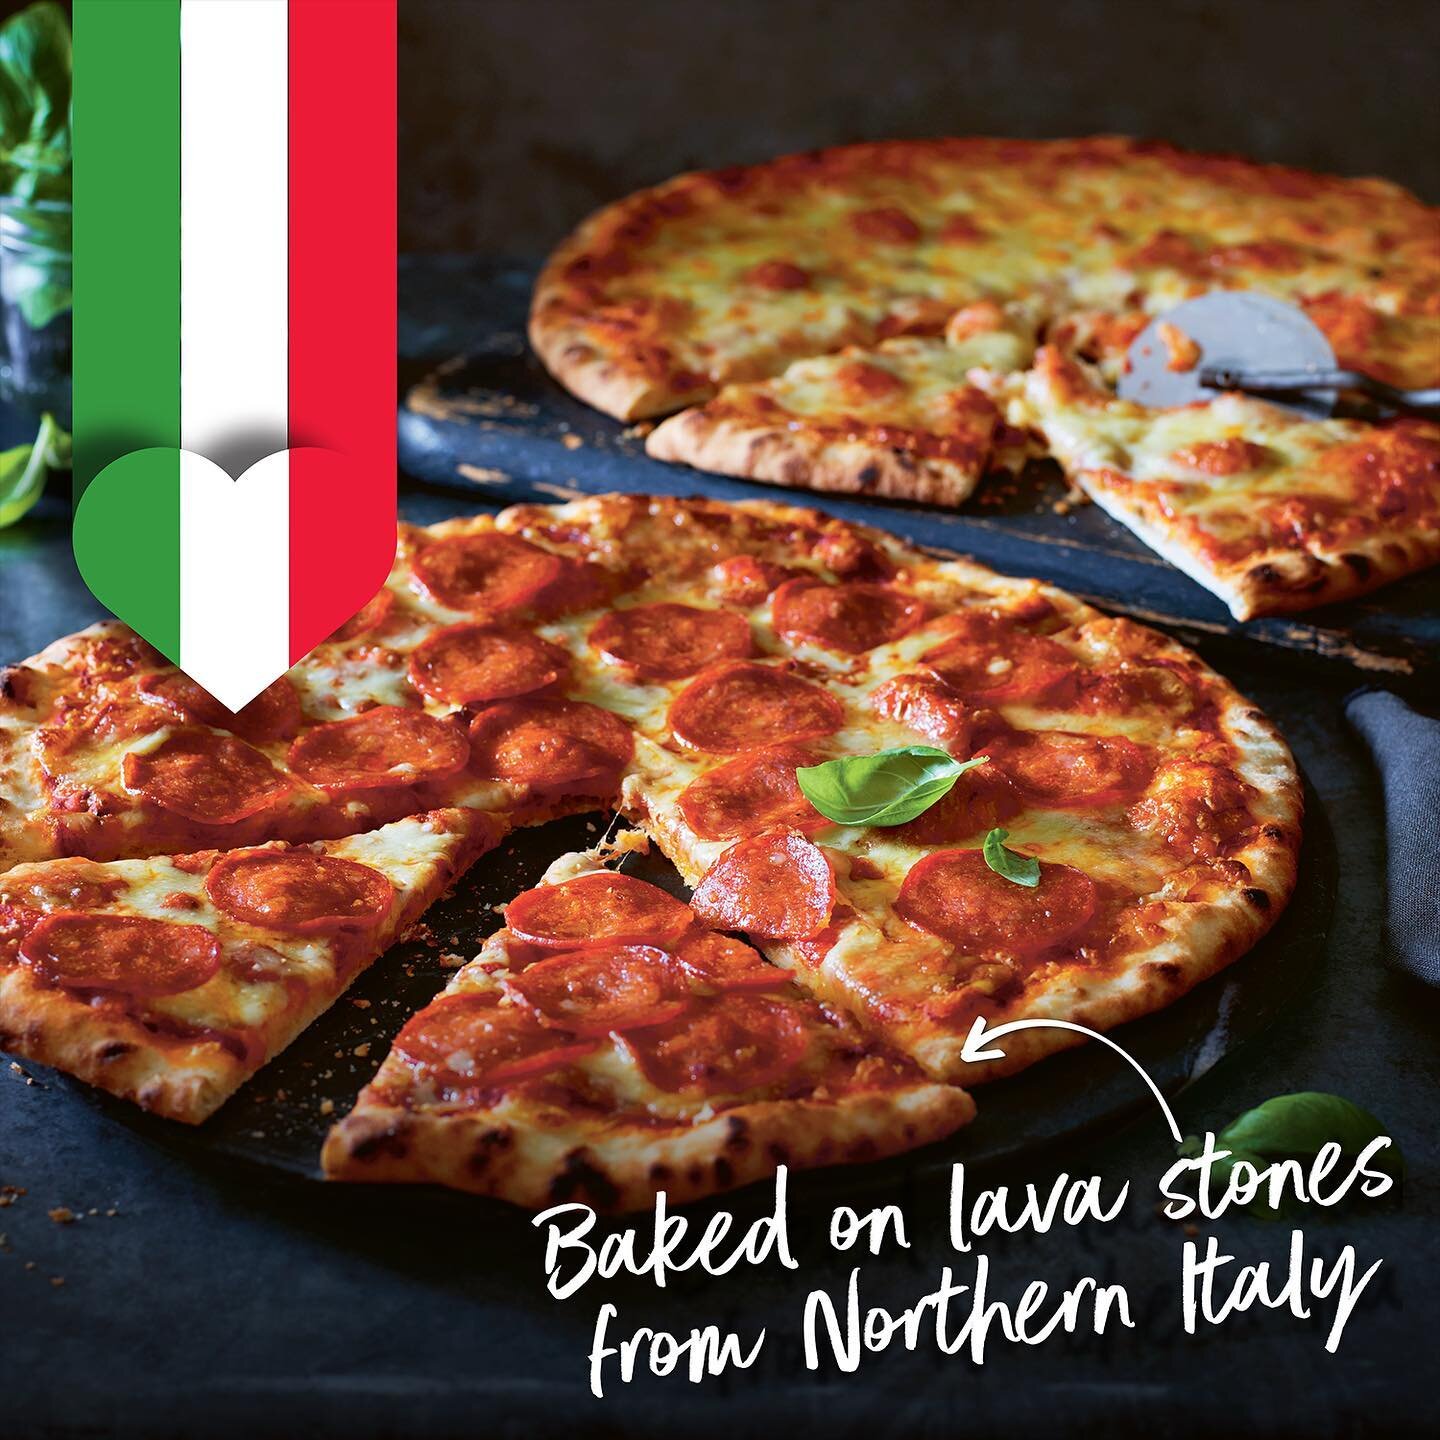 Grab a slice of our tastiest pizza meal deal ever. Mix and match two pizzas and two sides for only &pound;10.50 and create the ultimate feast. 🍕

View deal here: www.sandpiperci.com/ms-product-list-pizza 

#MandSJersey